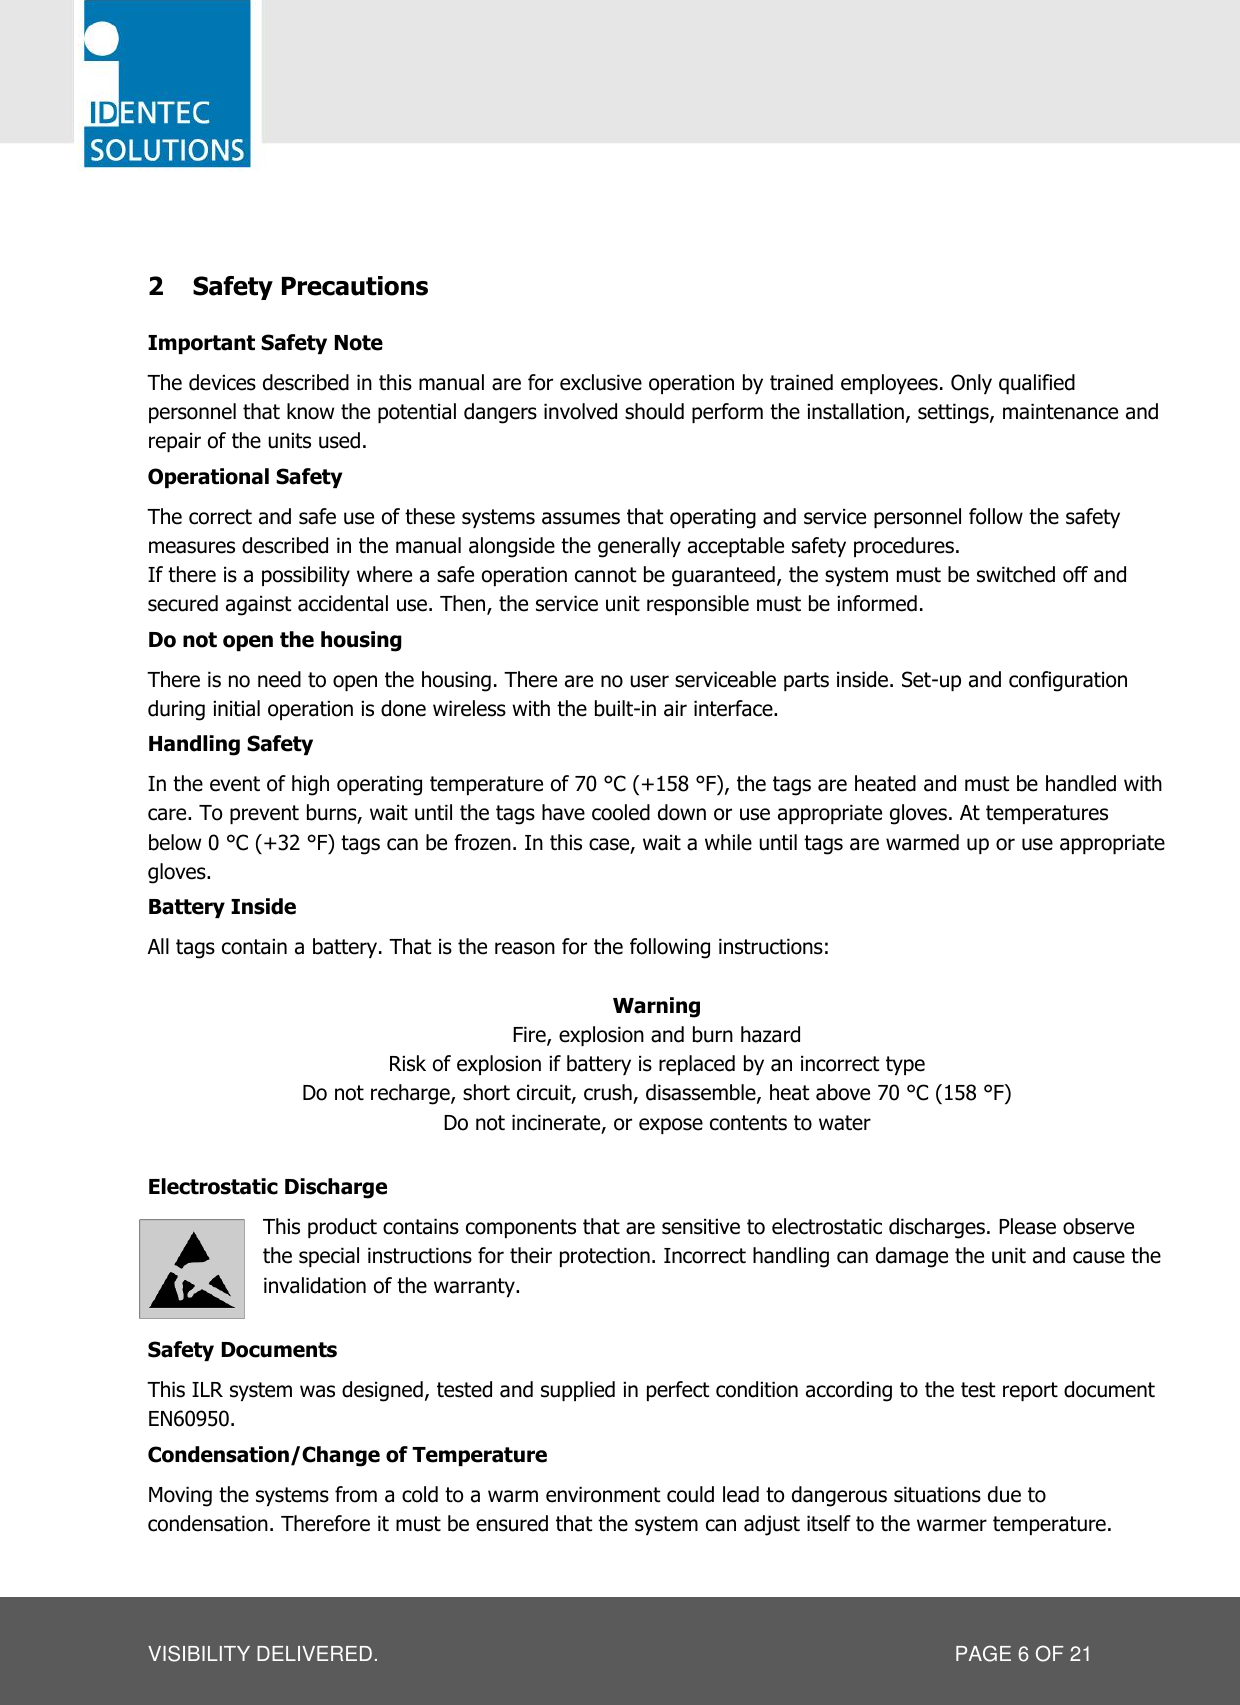   VISIBILITY DELIVERED.  PAGE 6 OF 21  2 Safety Precautions Important Safety Note The devices described in this manual are for exclusive operation by trained employees. Only qualified personnel that know the potential dangers involved should perform the installation, settings, maintenance and repair of the units used. Operational Safety The correct and safe use of these systems assumes that operating and service personnel follow the safety measures described in the manual alongside the generally acceptable safety procedures. If there is a possibility where a safe operation cannot be guaranteed, the system must be switched off and secured against accidental use. Then, the service unit responsible must be informed. Do not open the housing There is no need to open the housing. There are no user serviceable parts inside. Set-up and configuration during initial operation is done wireless with the built-in air interface. Handling Safety In the event of high operating temperature of 70 °C (+158 °F), the tags are heated and must be handled with care. To prevent burns, wait until the tags have cooled down or use appropriate gloves. At temperatures below 0 °C (+32 °F) tags can be frozen. In this case, wait a while until tags are warmed up or use appropriate gloves.  Battery Inside All tags contain a battery. That is the reason for the following instructions:  Warning Fire, explosion and burn hazard Risk of explosion if battery is replaced by an incorrect type Do not recharge, short circuit, crush, disassemble, heat above 70 °C (158 °F) Do not incinerate, or expose contents to water  Electrostatic Discharge This product contains components that are sensitive to electrostatic discharges. Please observe the special instructions for their protection. Incorrect handling can damage the unit and cause the invalidation of the warranty.  Safety Documents This ILR system was designed, tested and supplied in perfect condition according to the test report document EN60950. Condensation/Change of Temperature Moving the systems from a cold to a warm environment could lead to dangerous situations due to condensation. Therefore it must be ensured that the system can adjust itself to the warmer temperature. 